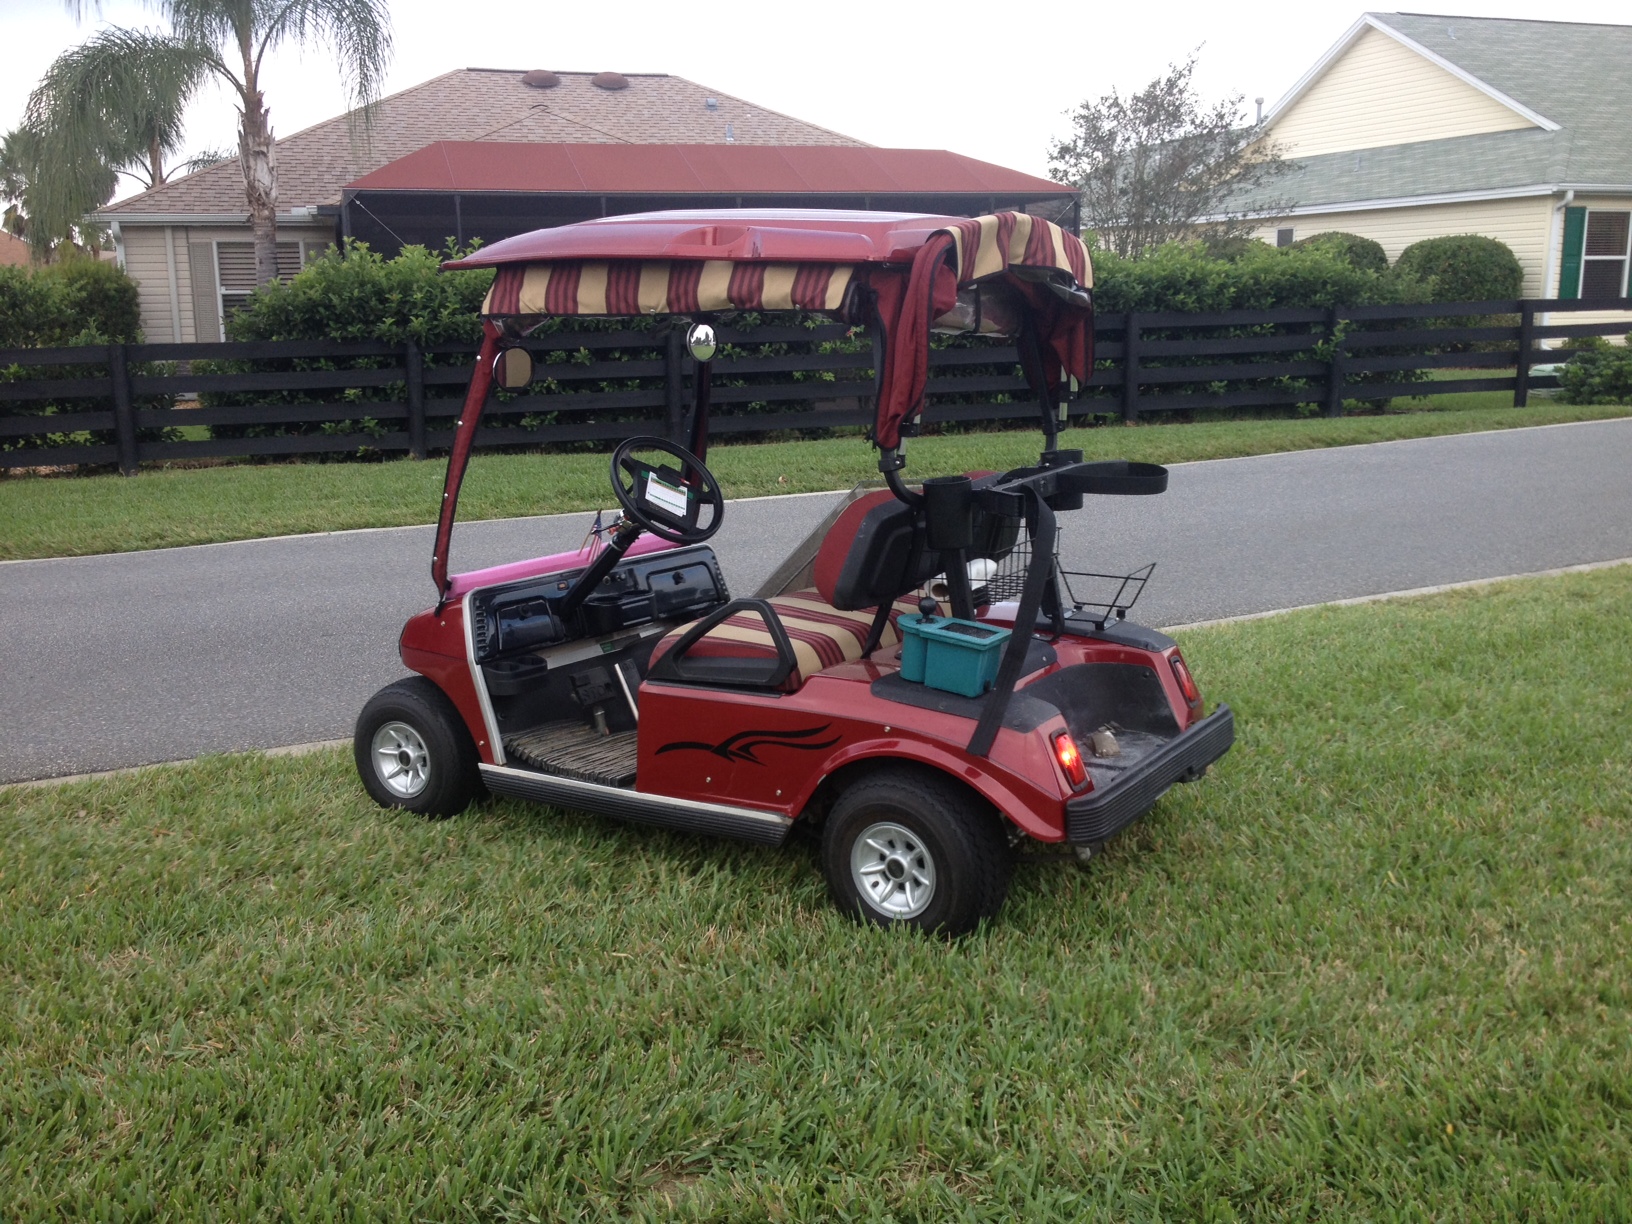 Red golf cart involved in accident, abandoned near Savannah Center cart path